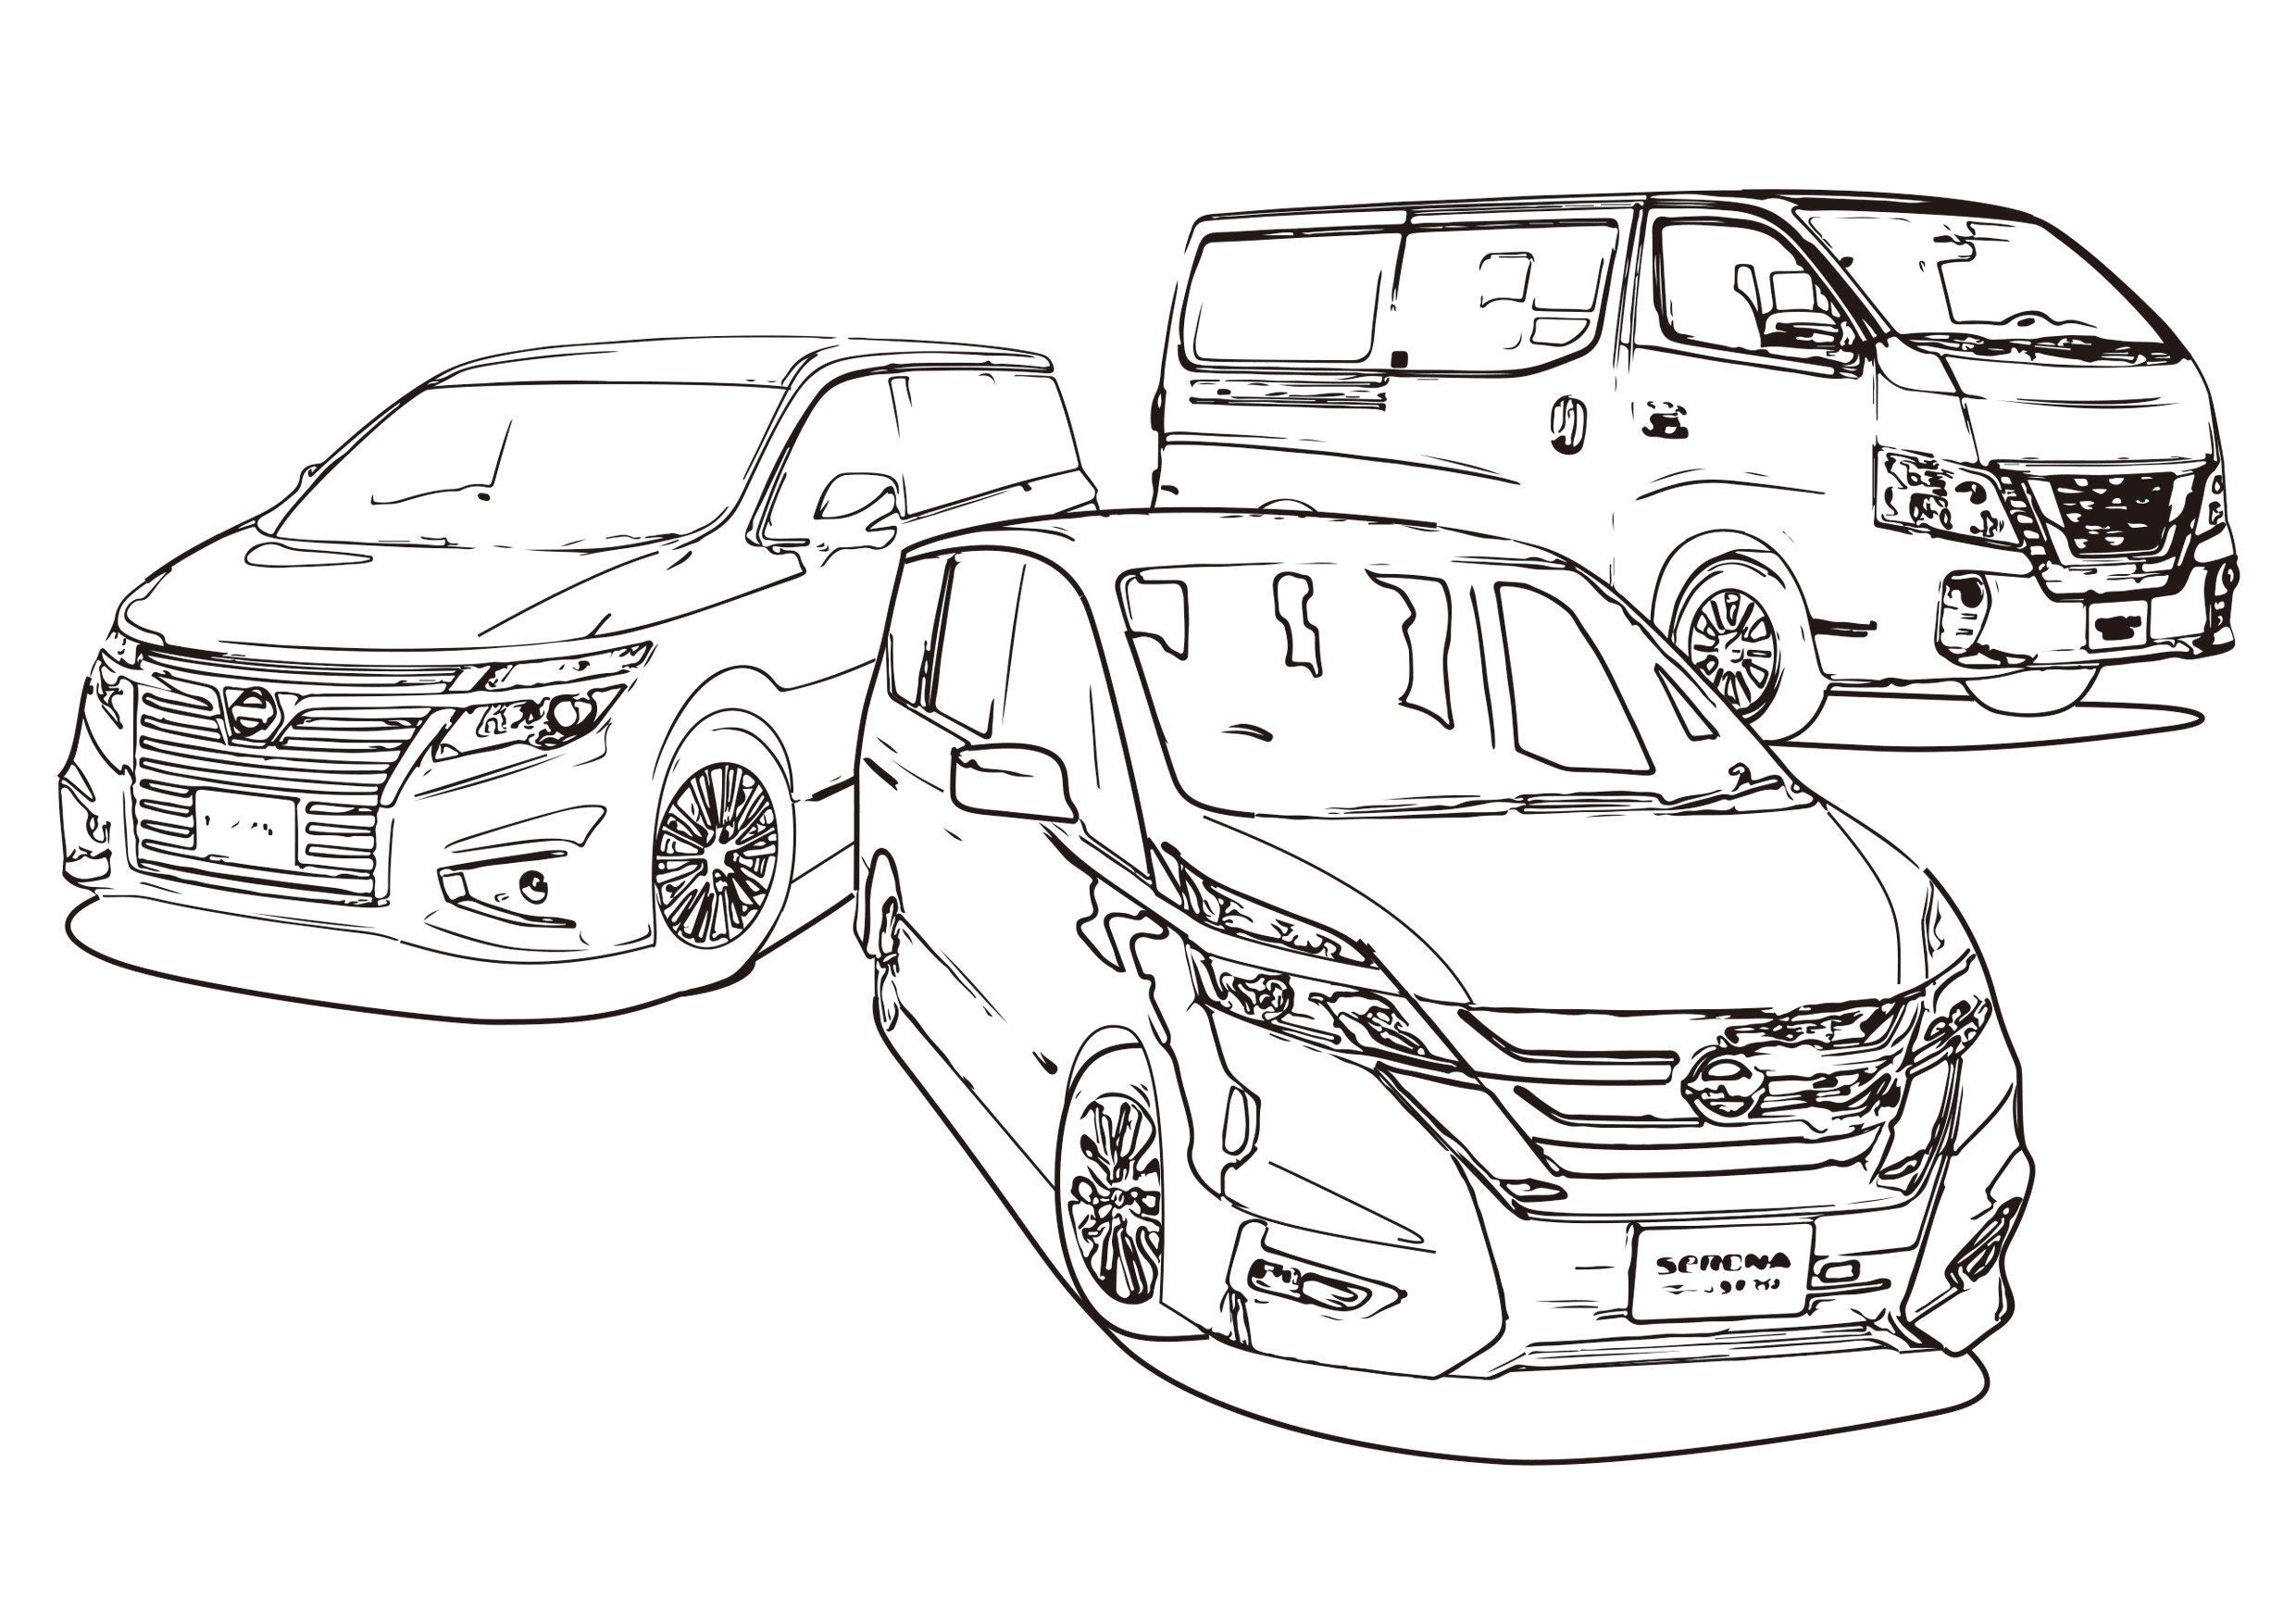 Nissan Design Car Coloring Pages Website Tools Int L Corp